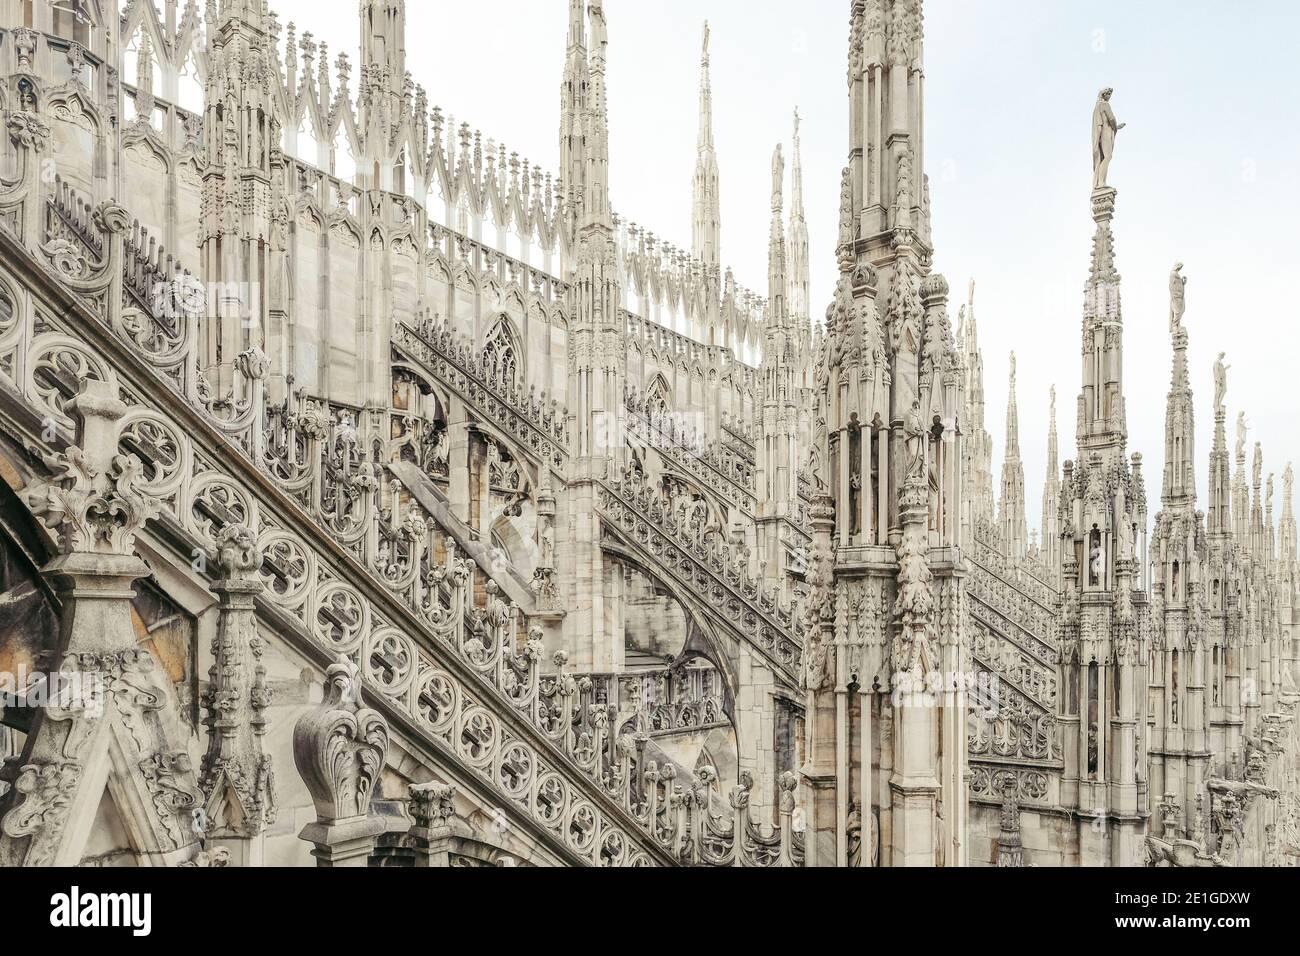 Duomo di Milano is the cathedral church of Milan, Lombardy, Italy. It took nearly six centuries to complete and is the largest church in Italy. Stock Photo